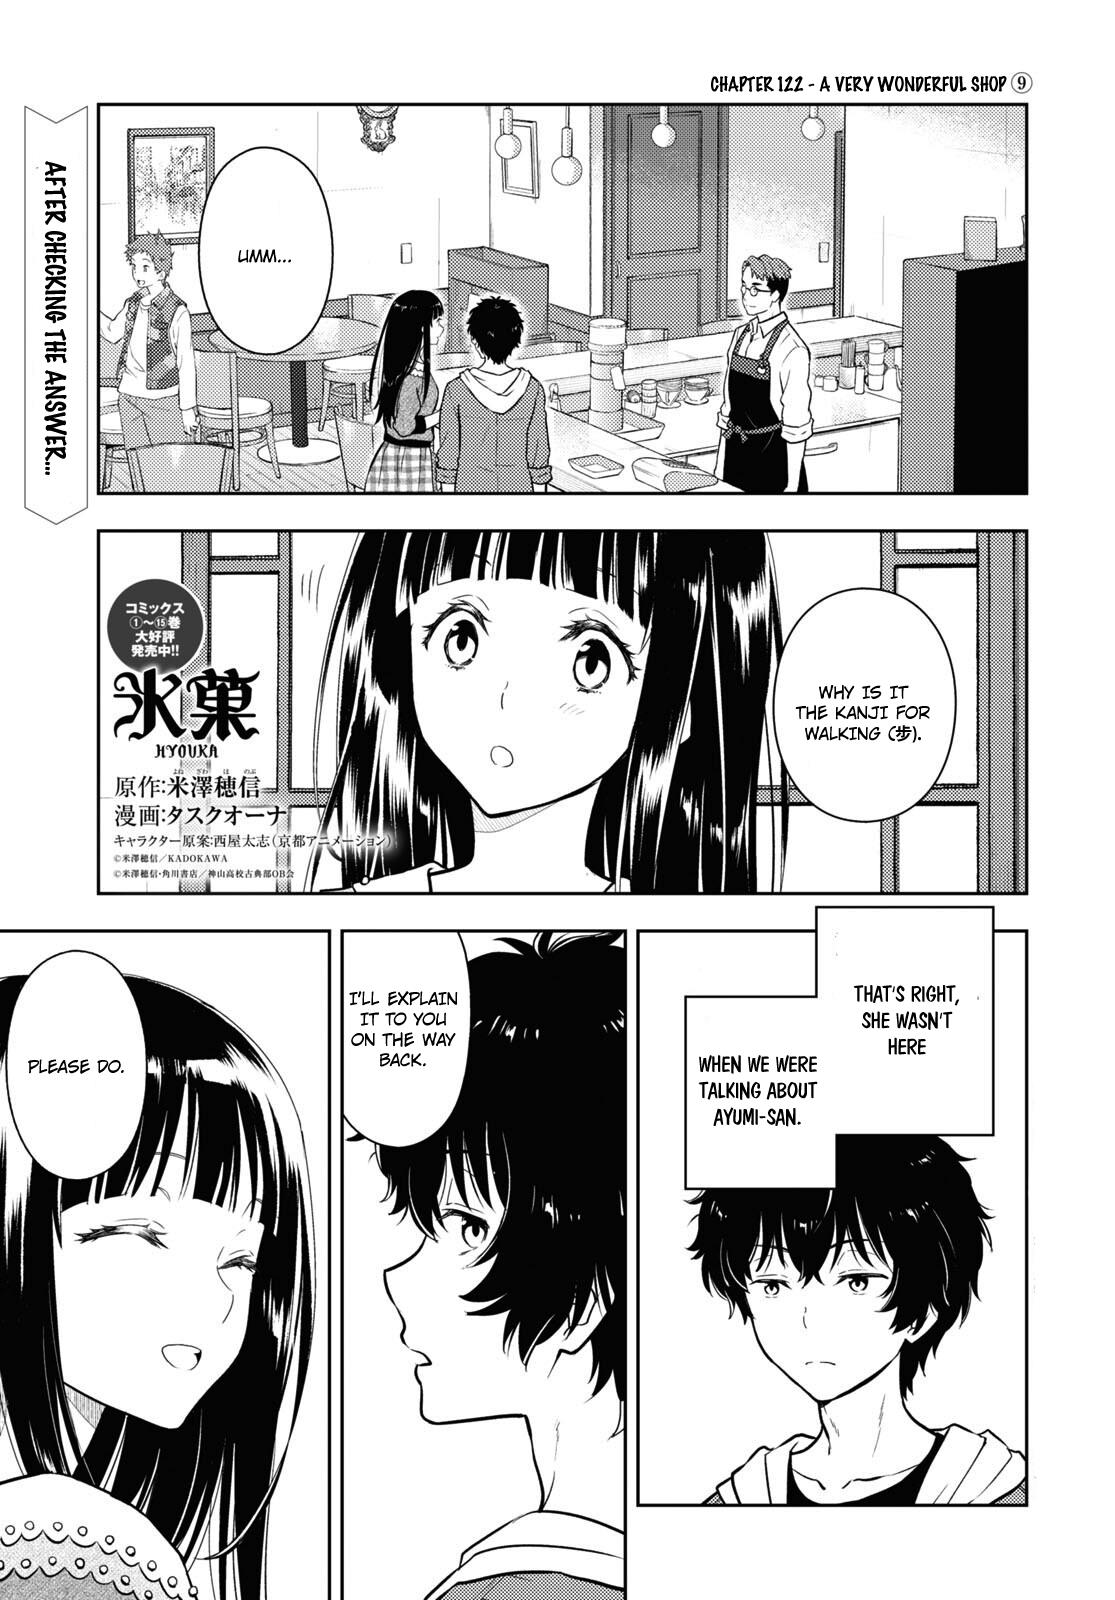 Hyouka Chapter 122: A Very Wonderful Shop ⑨ - Picture 1